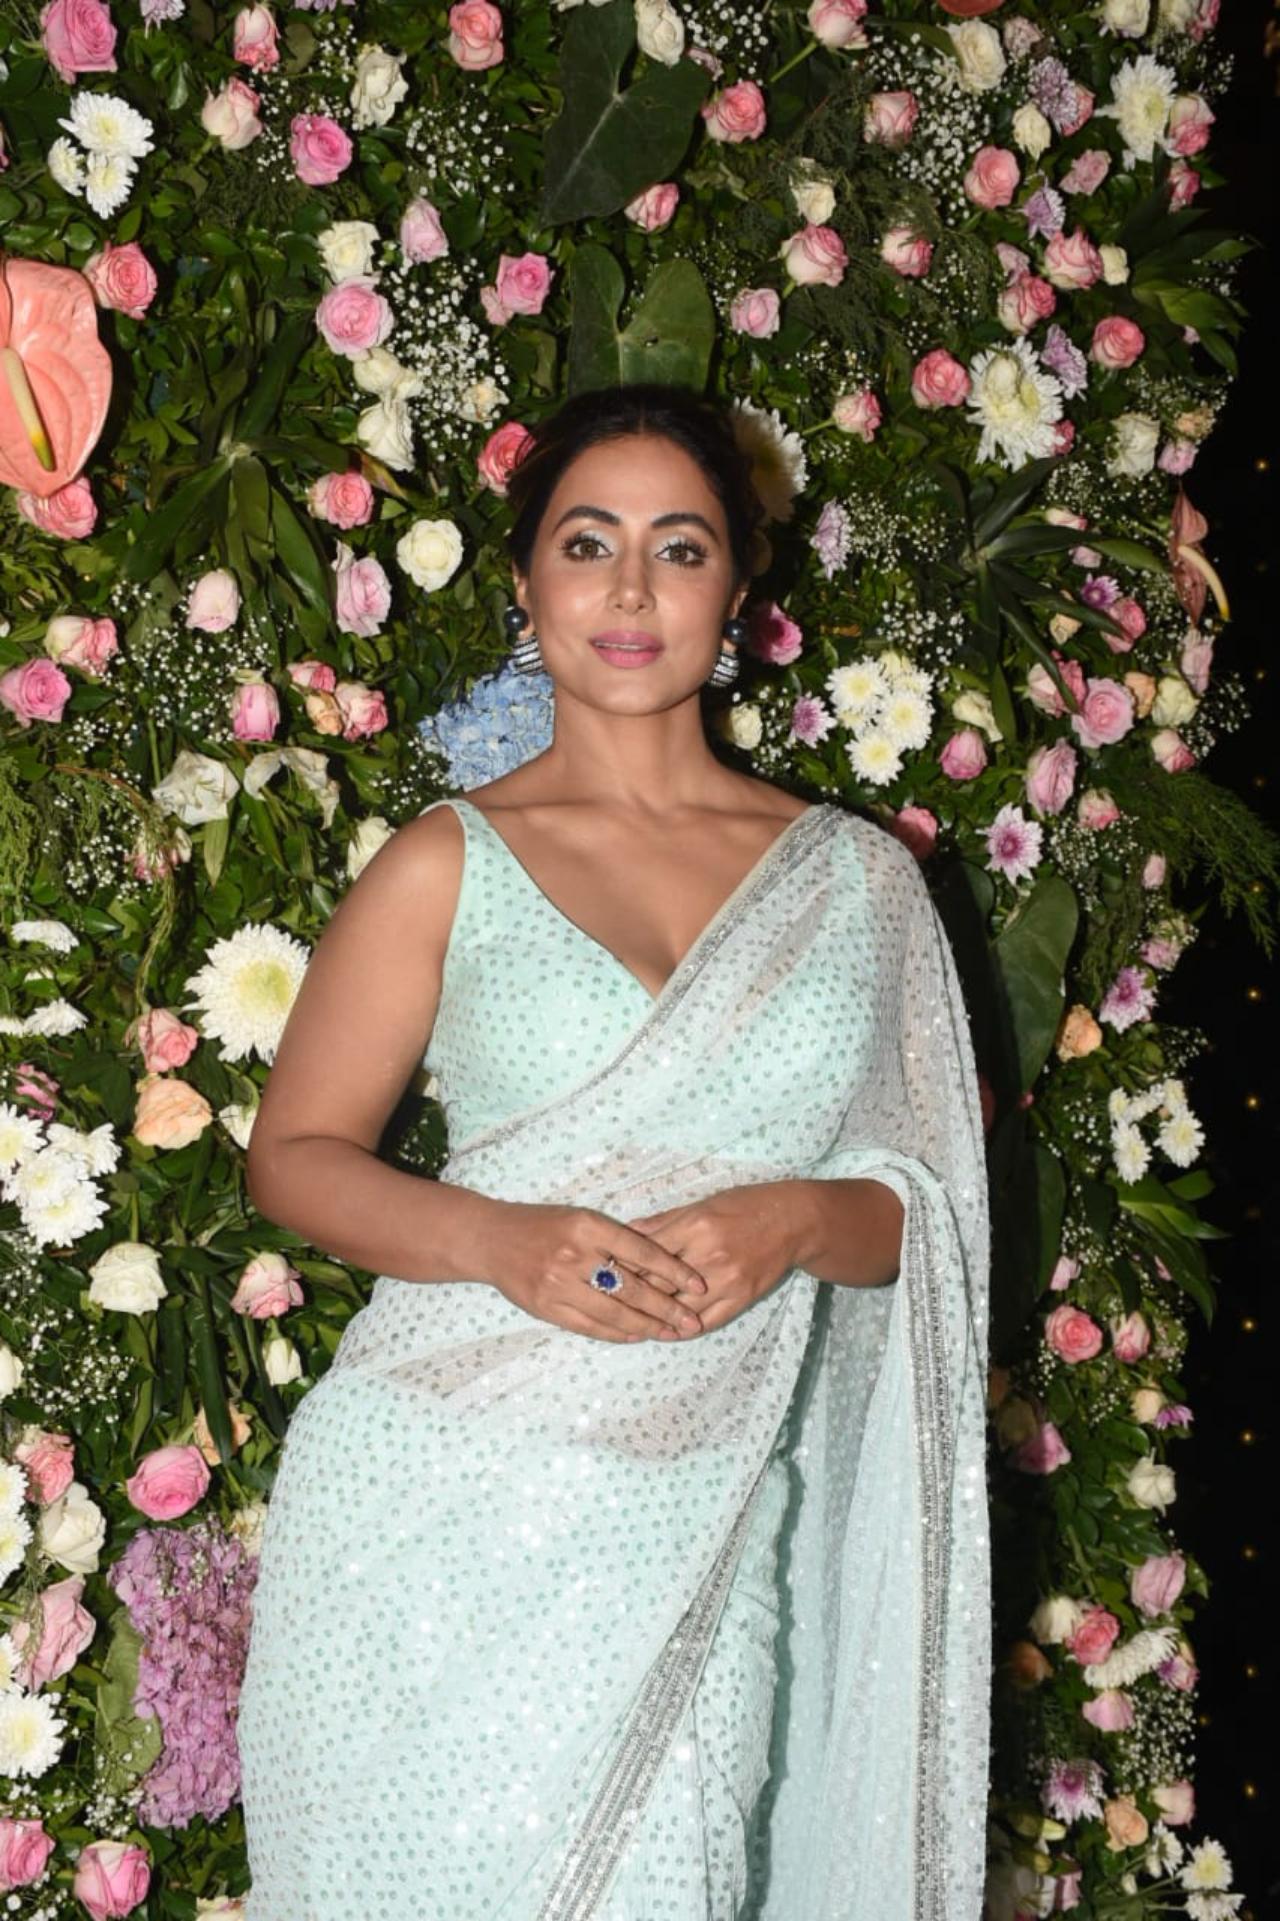 Hina Khan looked stunning in a sky blue saree and struck some confident poses for the paparazzi